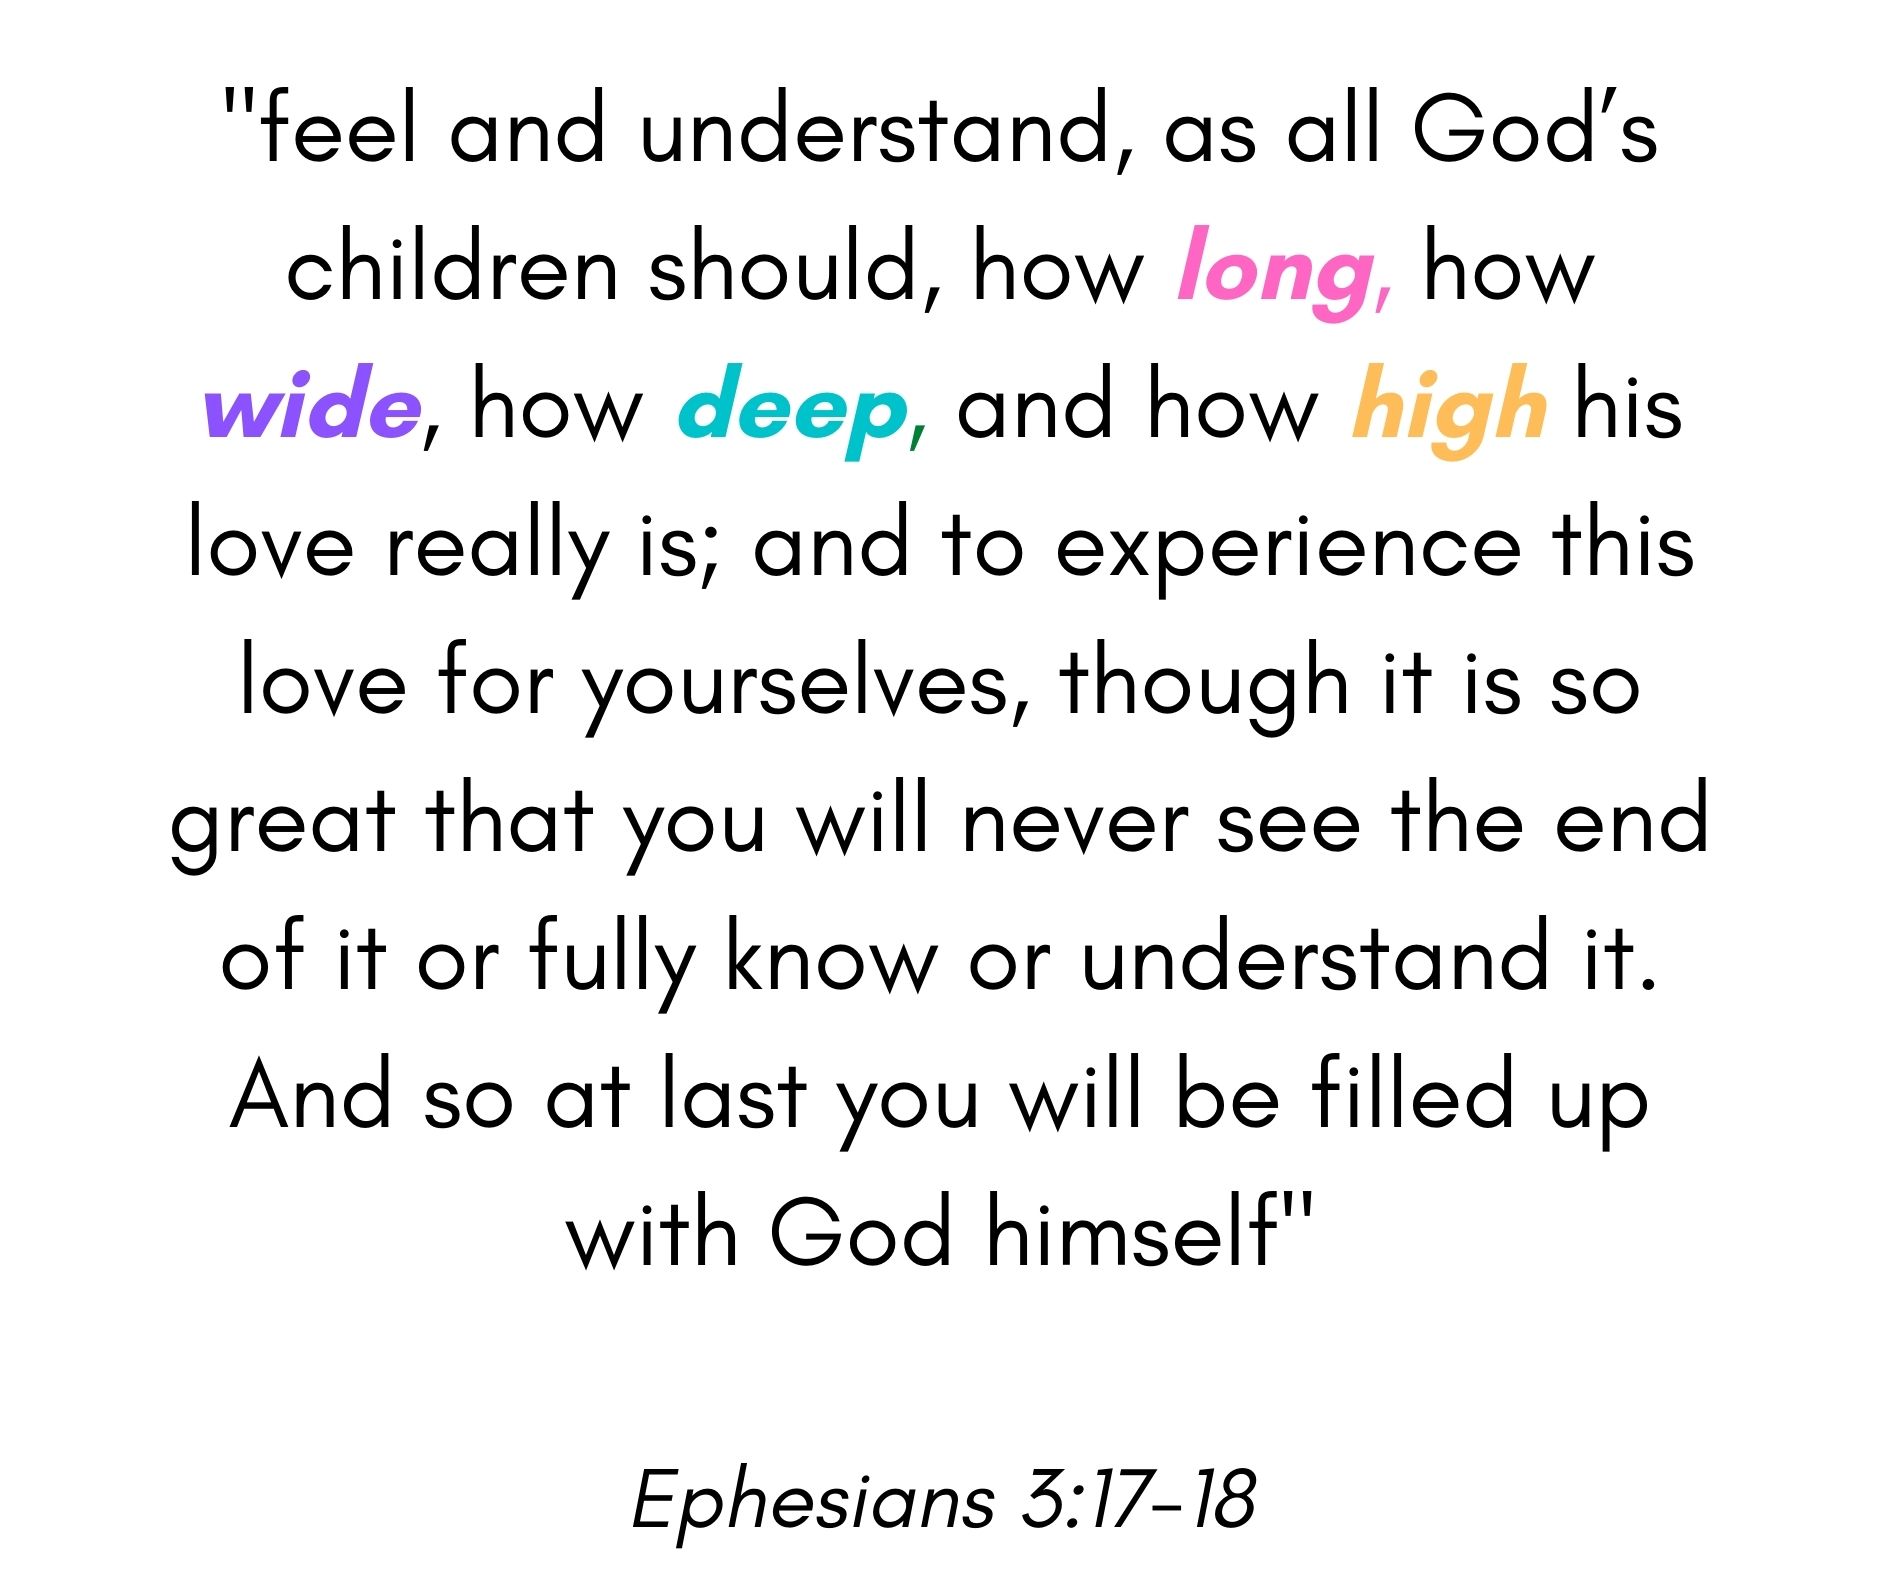 what is God's love according to the bible